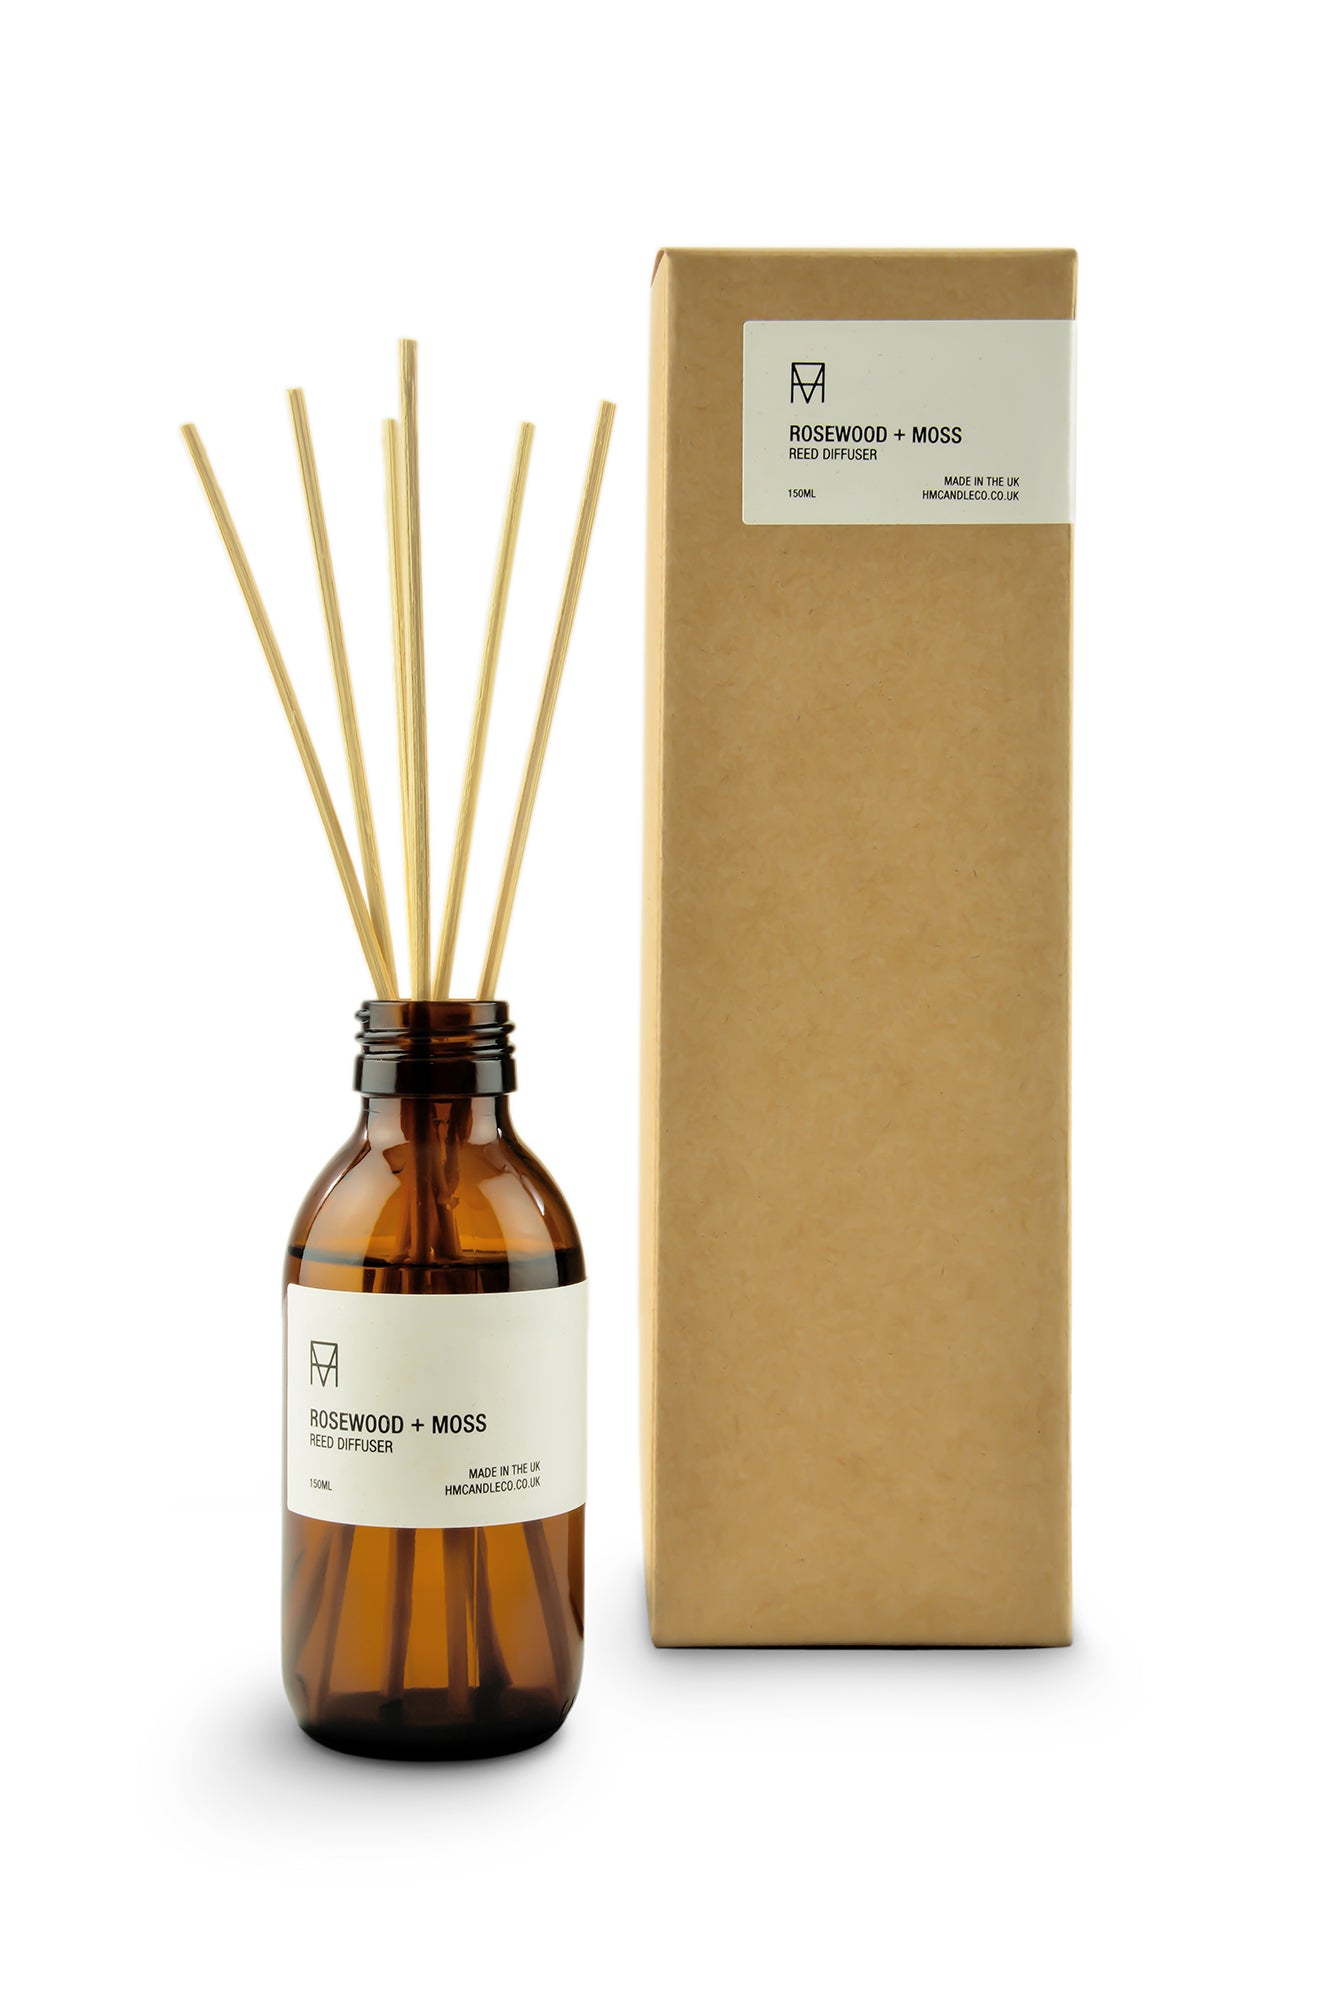 Rosewood + Moss Reed Diffuser